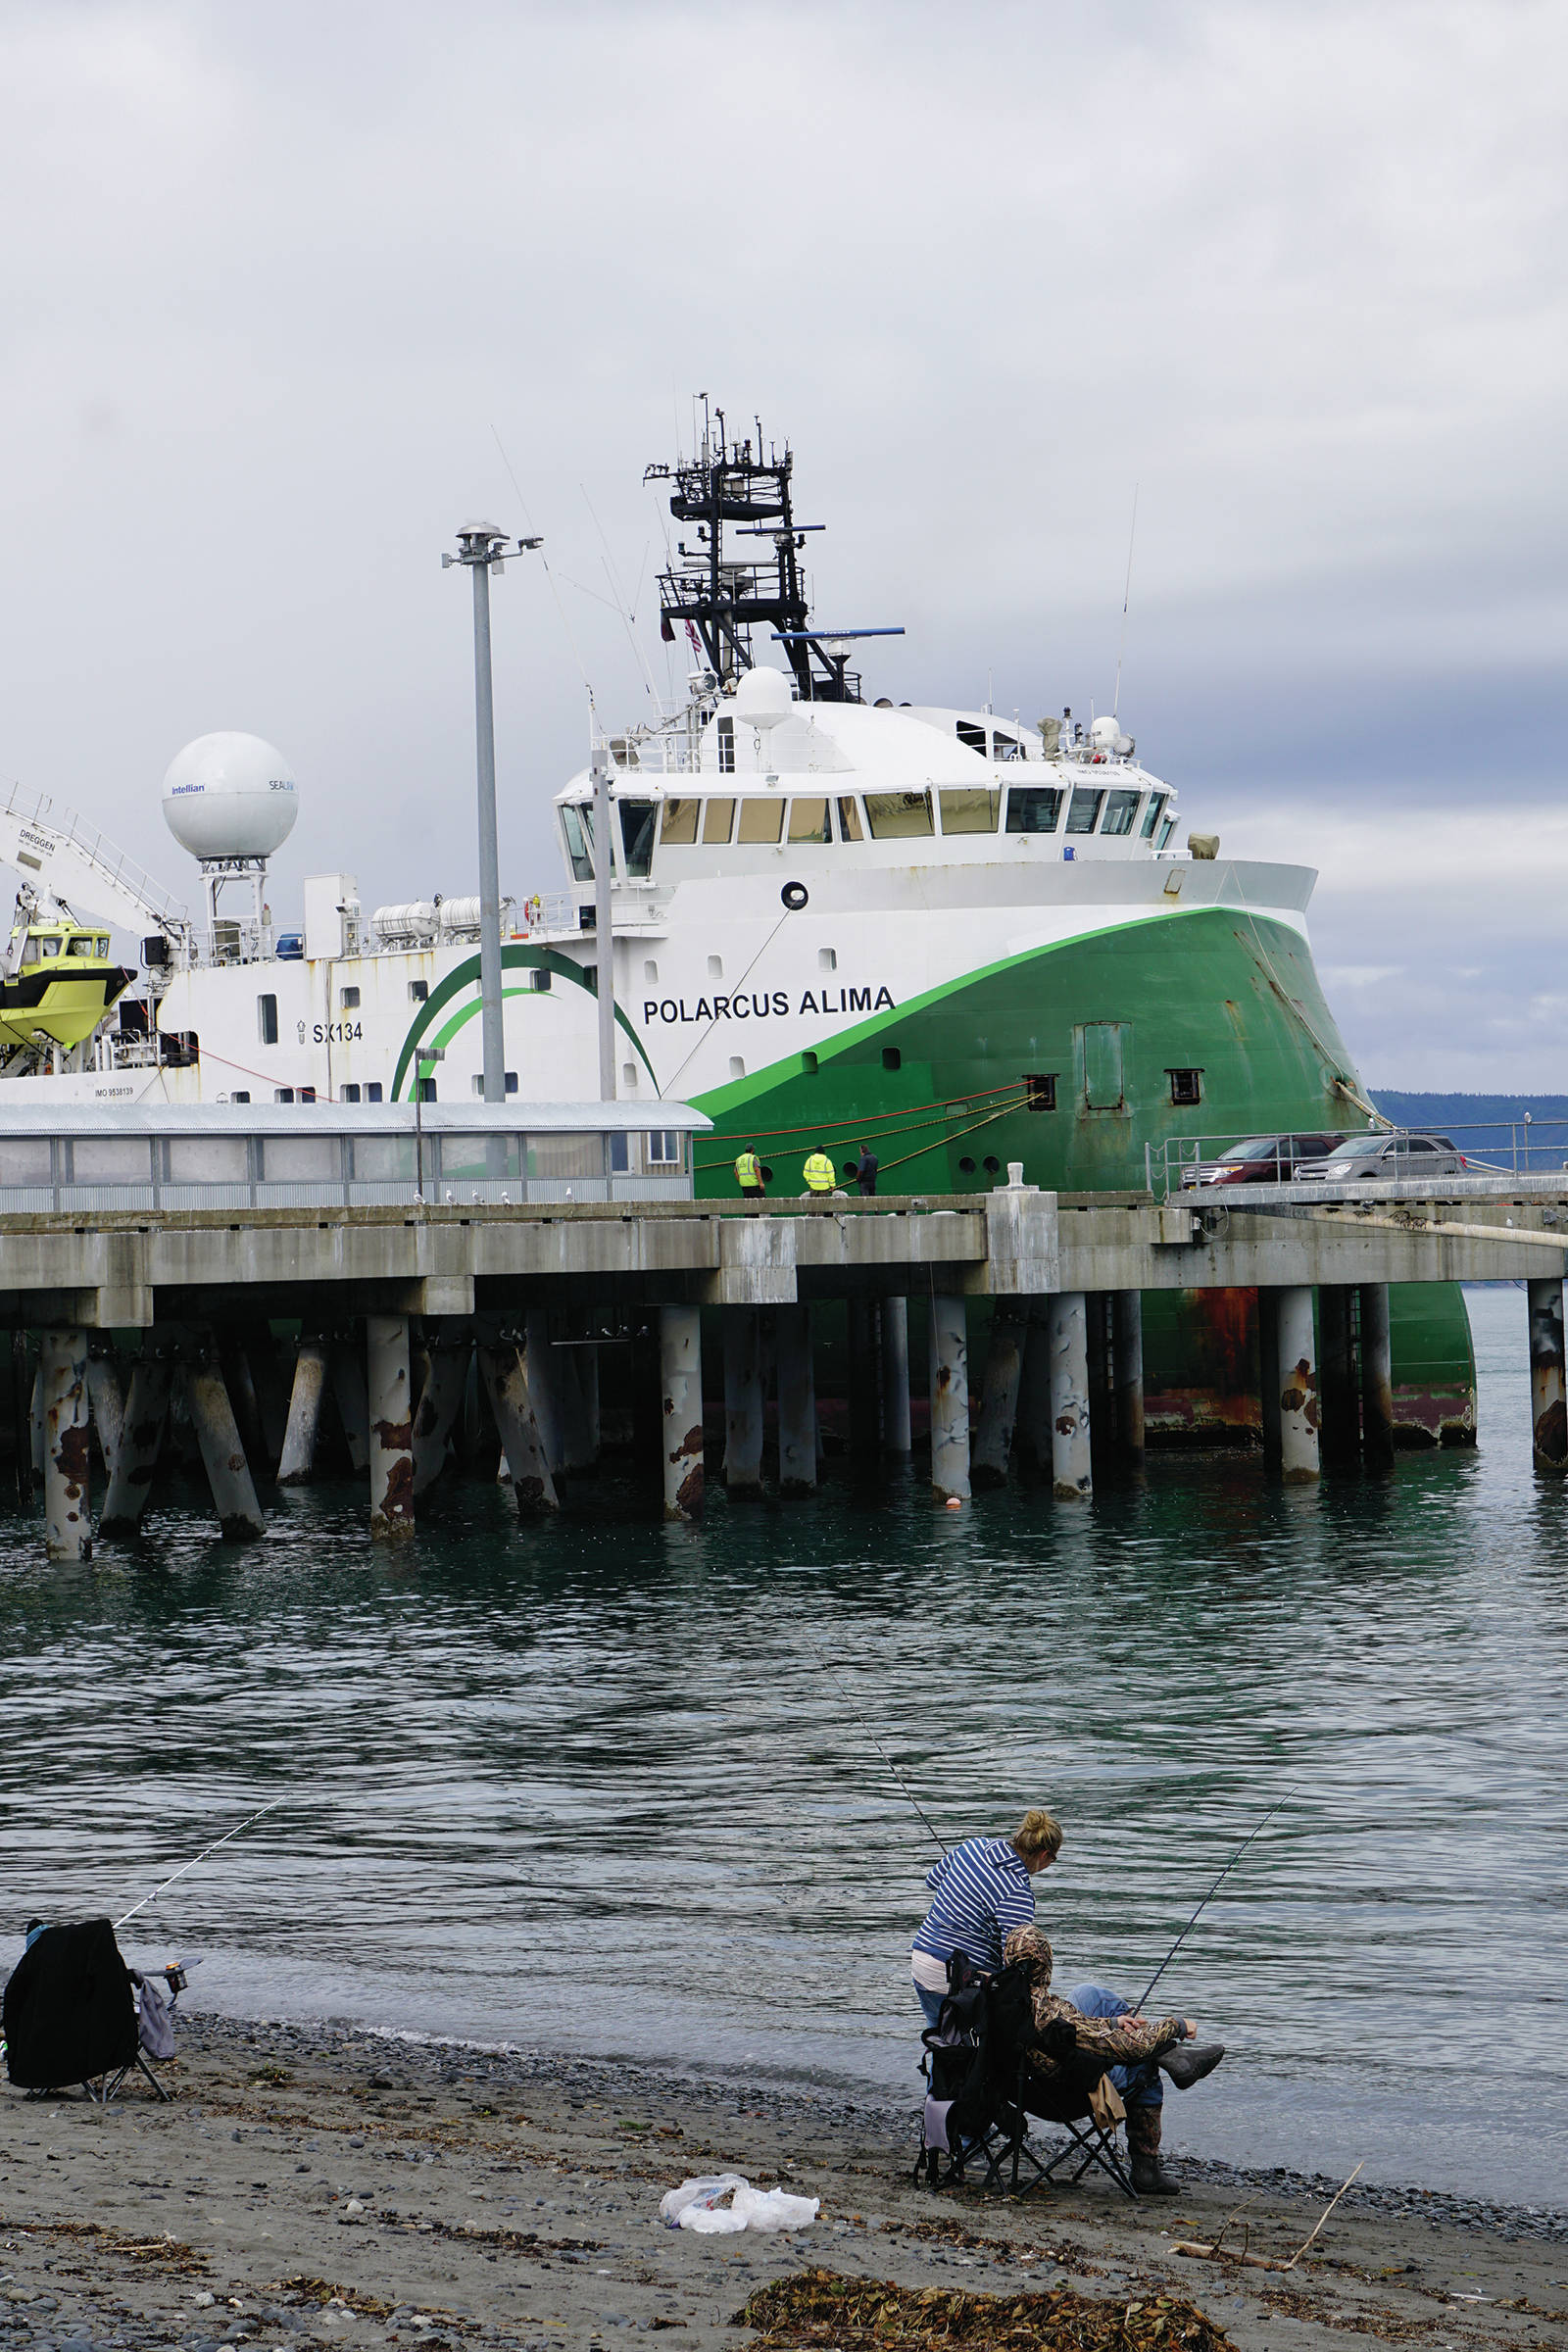 The Polarcus Alima is moored at the Pioneer Dock on the Homer Spit on Monday, Sept. 9, 2019, in Homer, Alaska. The seismic exploration vessel will be used under contract to Hilcorp to do seismic testing in federal waters of lower Cook Inlet in September. (Photo by Michael Armstrong/Homer News)